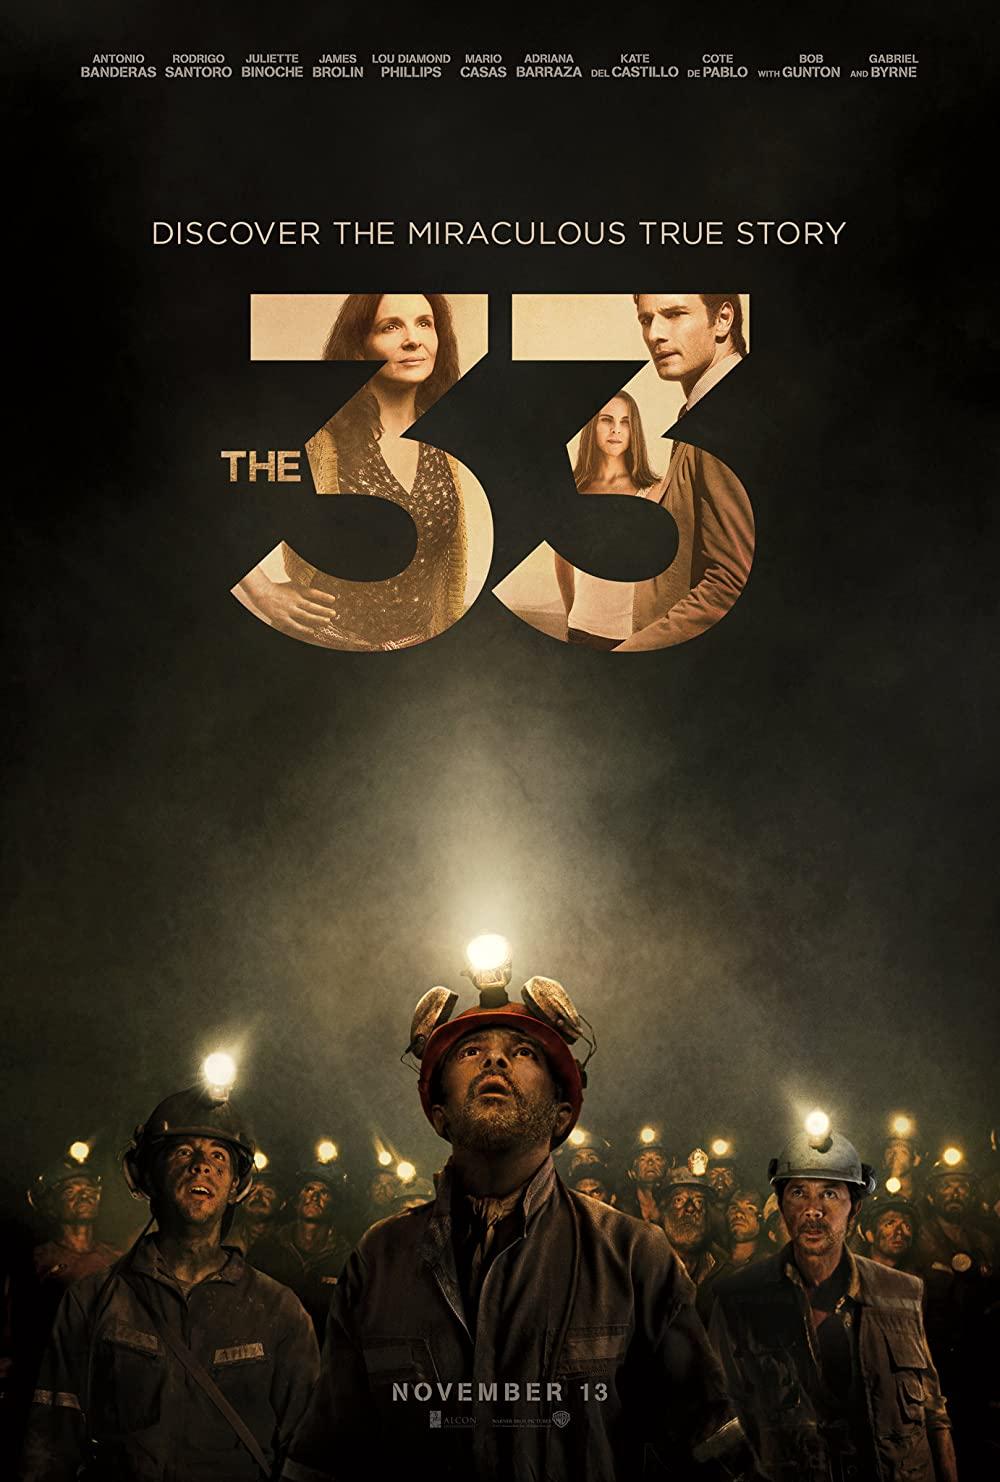 1.THE 33